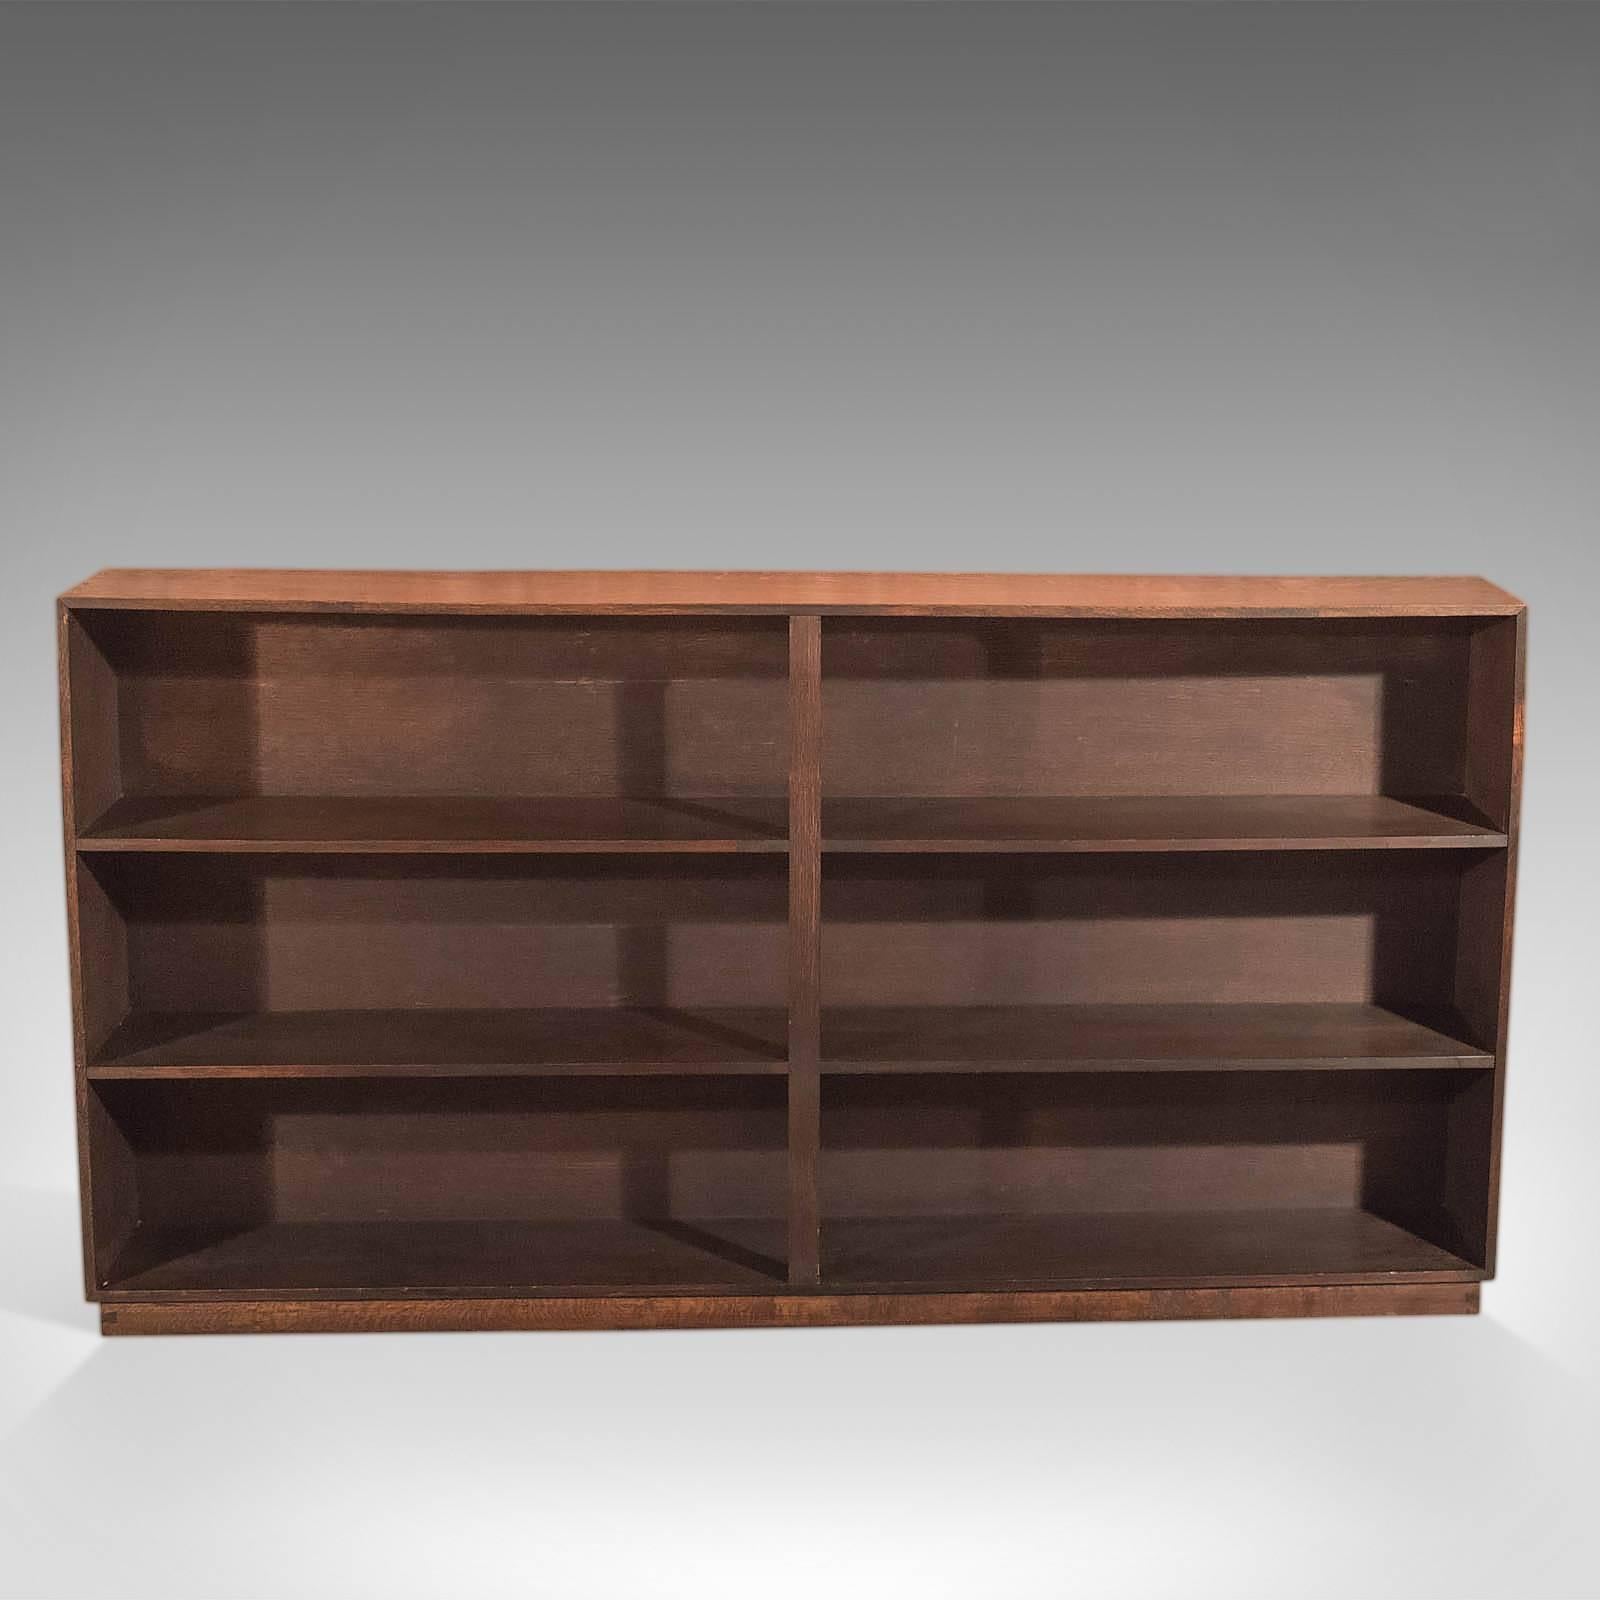 This is a Mid-Century open bookcase in English oak.

In classic six sectional form following early Georgian influence, this practical book shelf offers extensive storage with shelves eleven inches high and nine and a quarter deep.

Raised on a